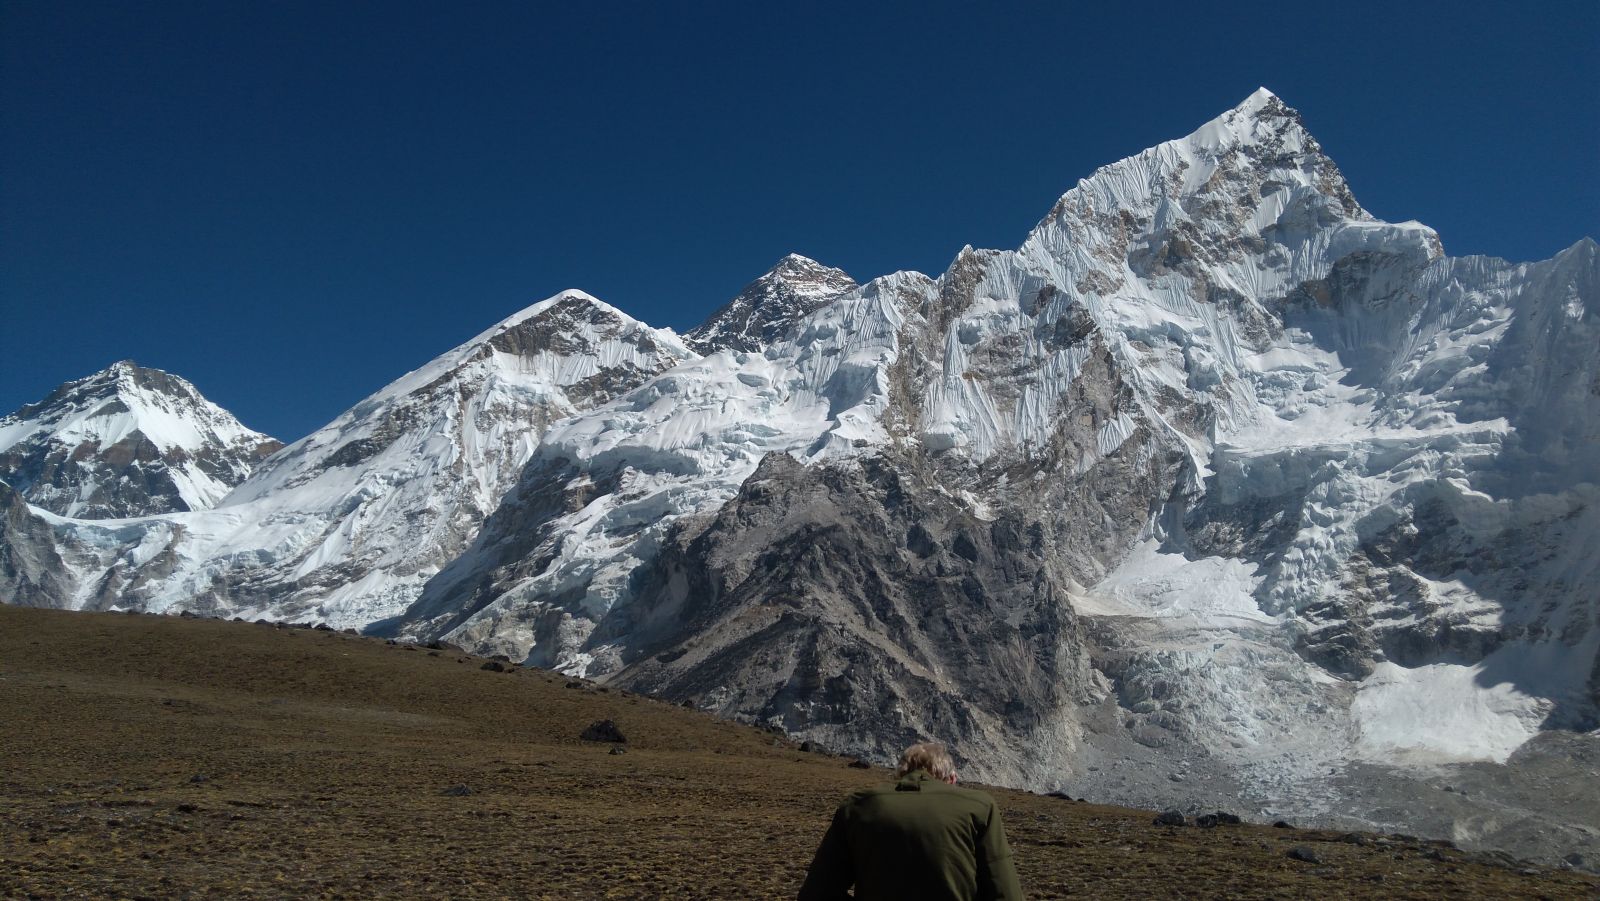 View of Everest during Everest Base Camp Trek - one of the popular trekking adventures in Nepal